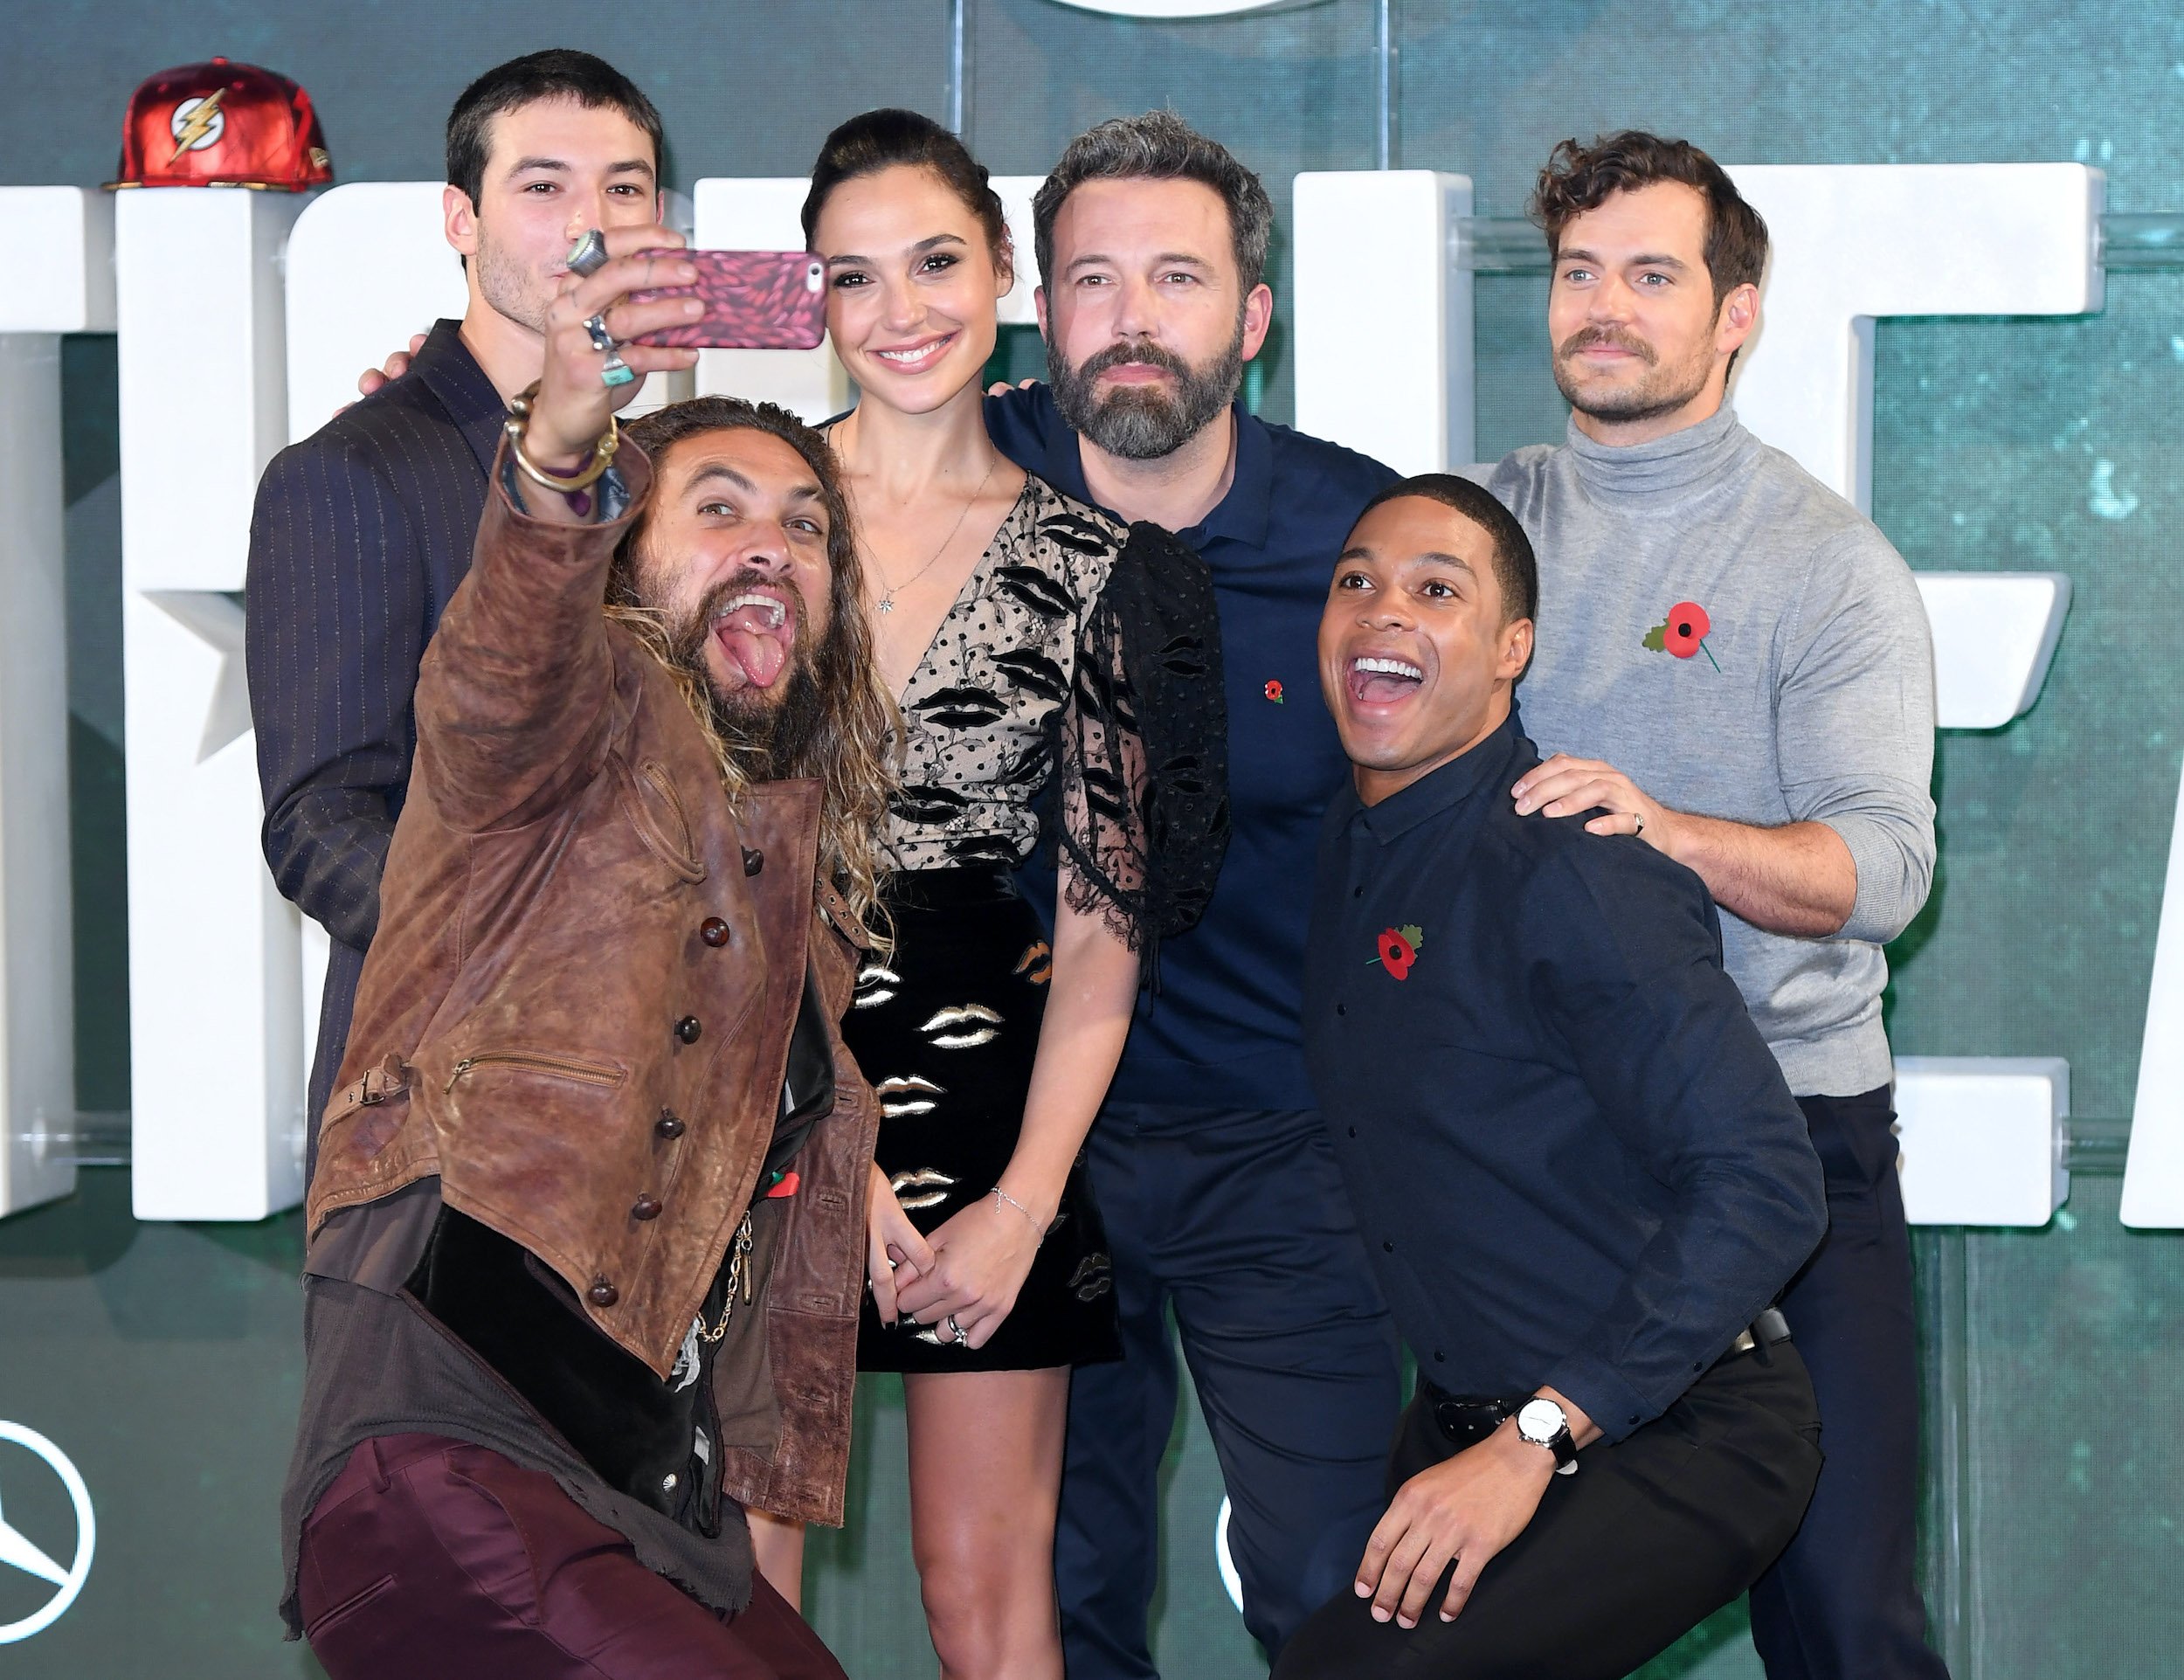 Ezra Miller, Jason Momoa, Gal Gadot, Ben Affleck, Ray Fisher and Henry Cavill attend the 'Justice League' photocall at The College